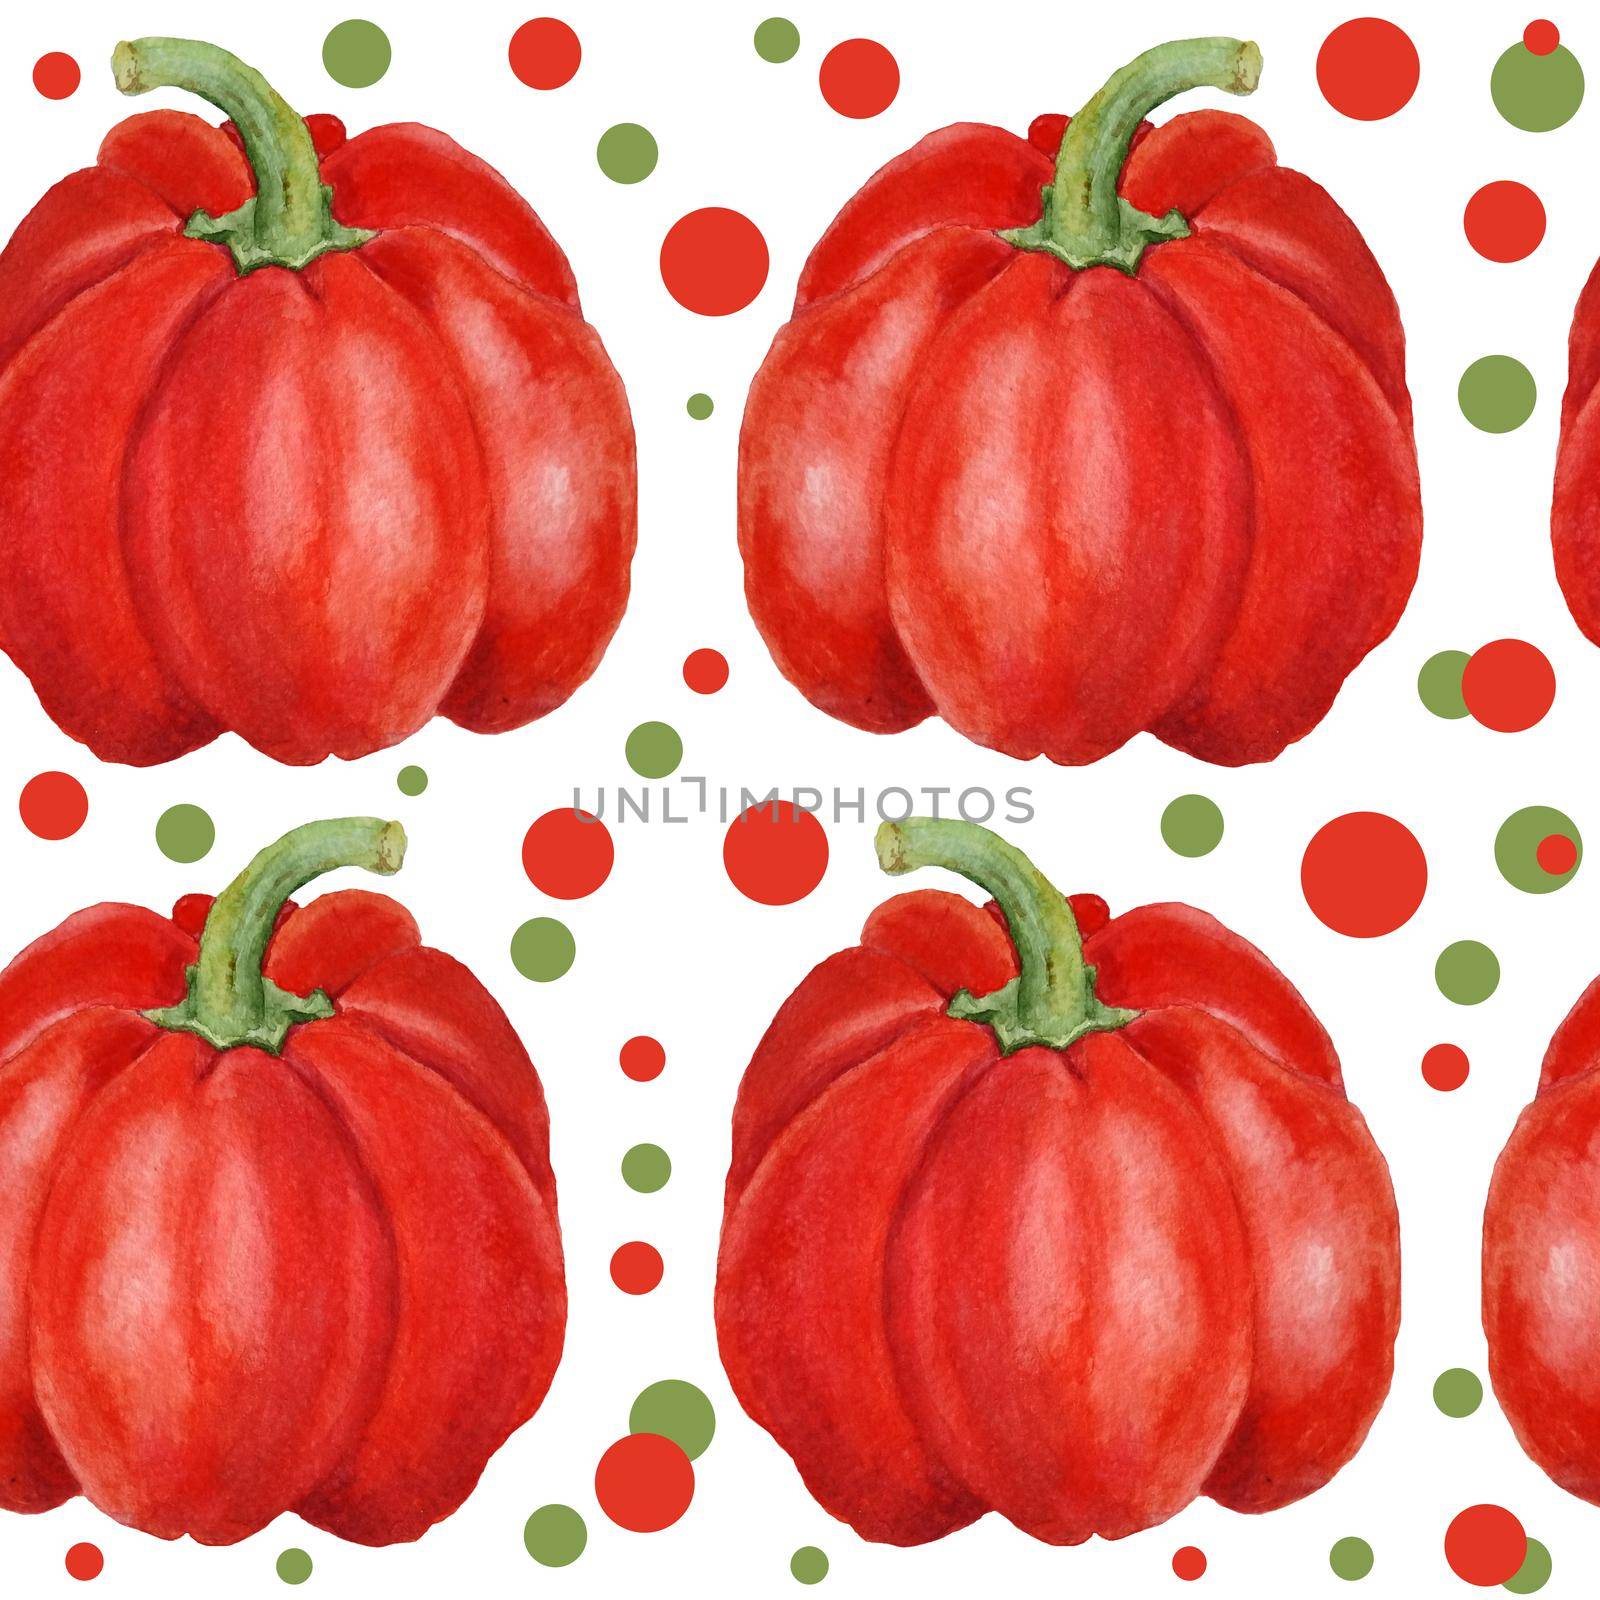 Watercolor hand drawn seamless pattern illustration of red bell pepper paprika with polka dot background. Harvest farm vegetables, organic food ingredient vegan vegetarian diet. Ripe agriculture produce for labels cafe. by Lagmar